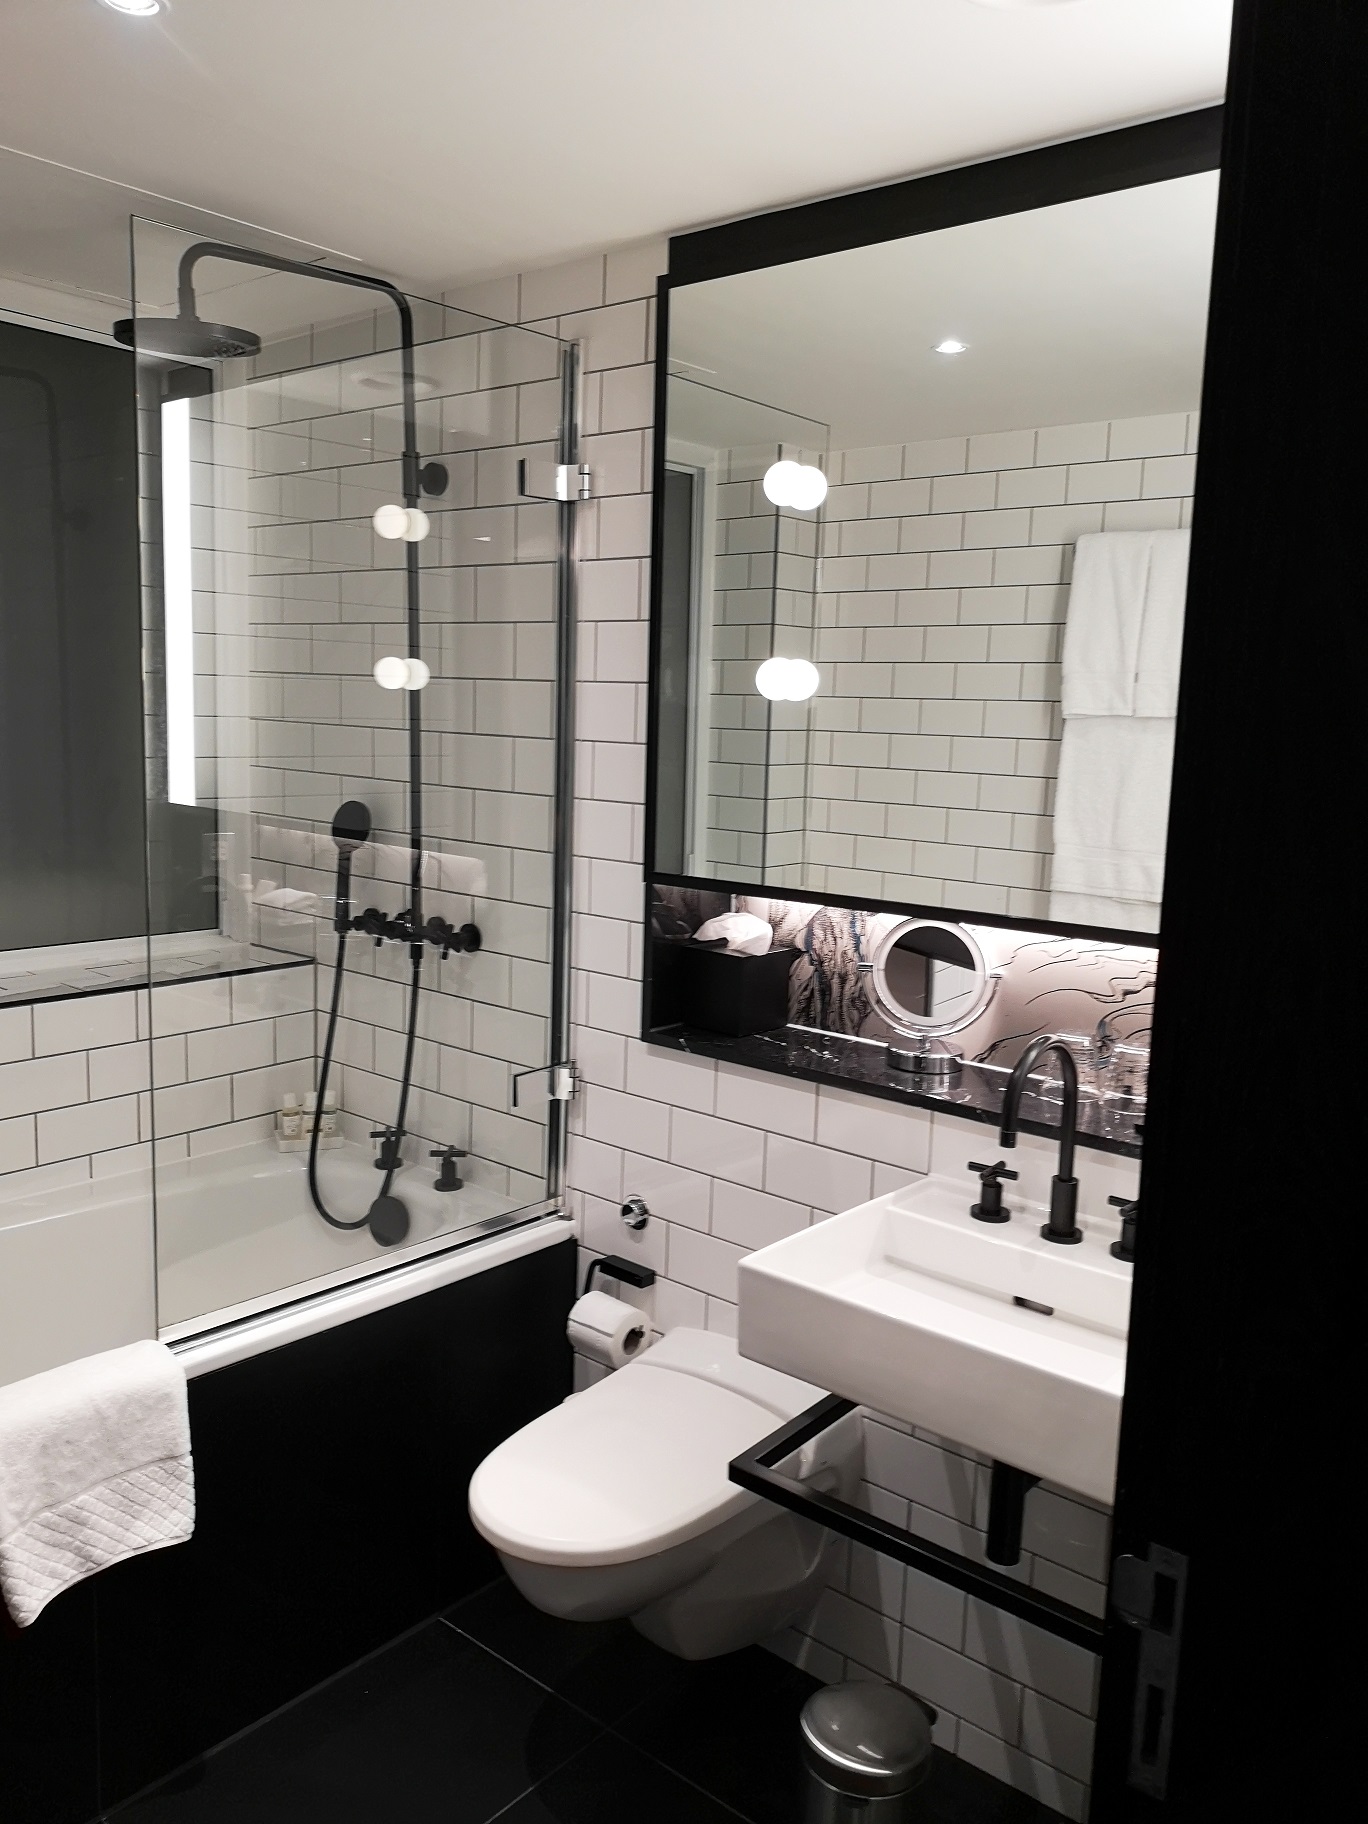 Andaz London Liverpool Street, London Luxury Hotel, Five-Star London Hotel, Hotel Review, Family Staycation, Family Friendly, UK Staycation, Shoreditch, Liverpool Street, East London, The Frenchie Mummy, Deluxe Family Room